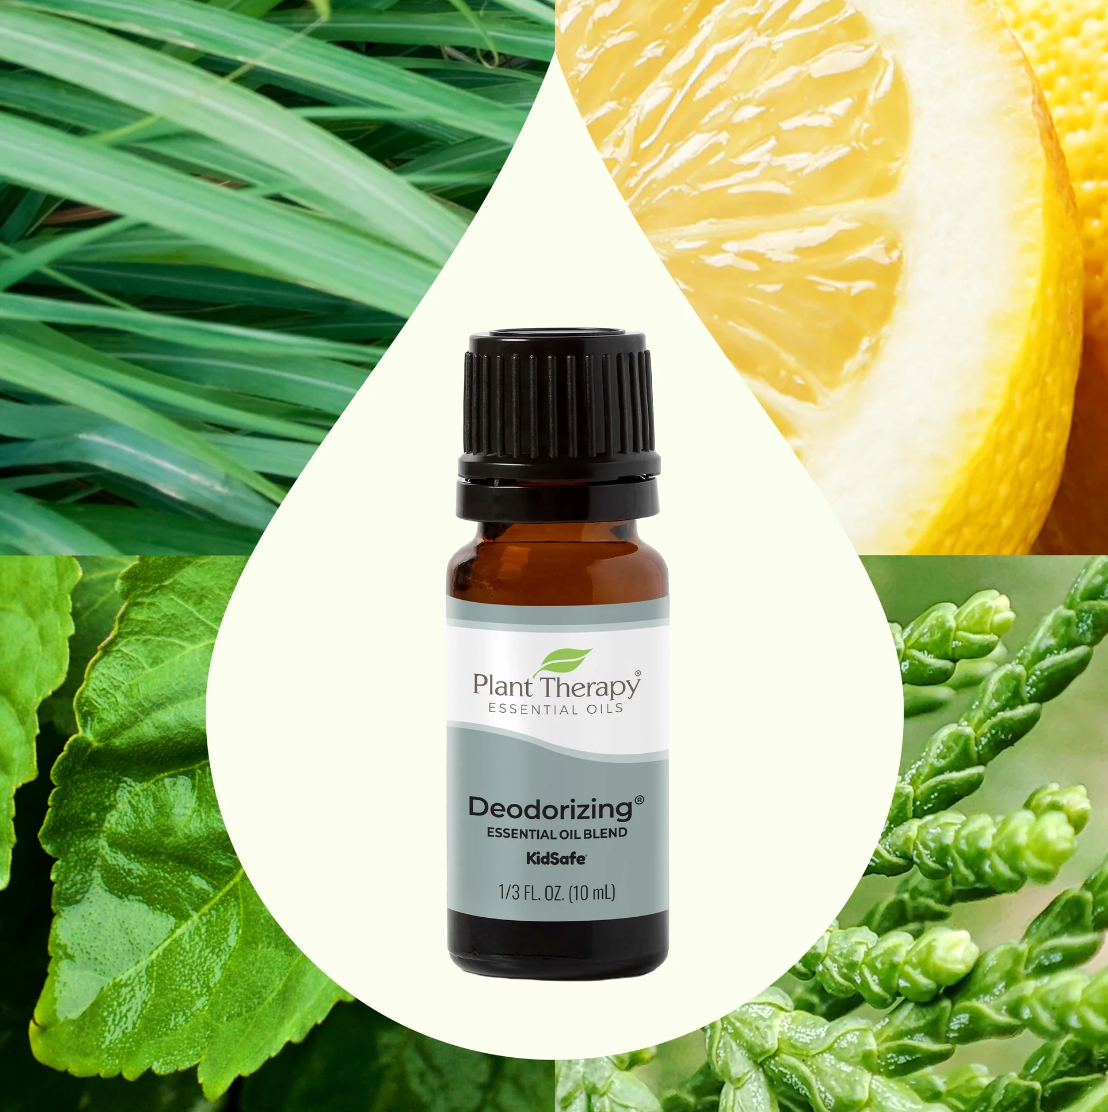 Plant Therapy Deodorizing Essential Oil Blend